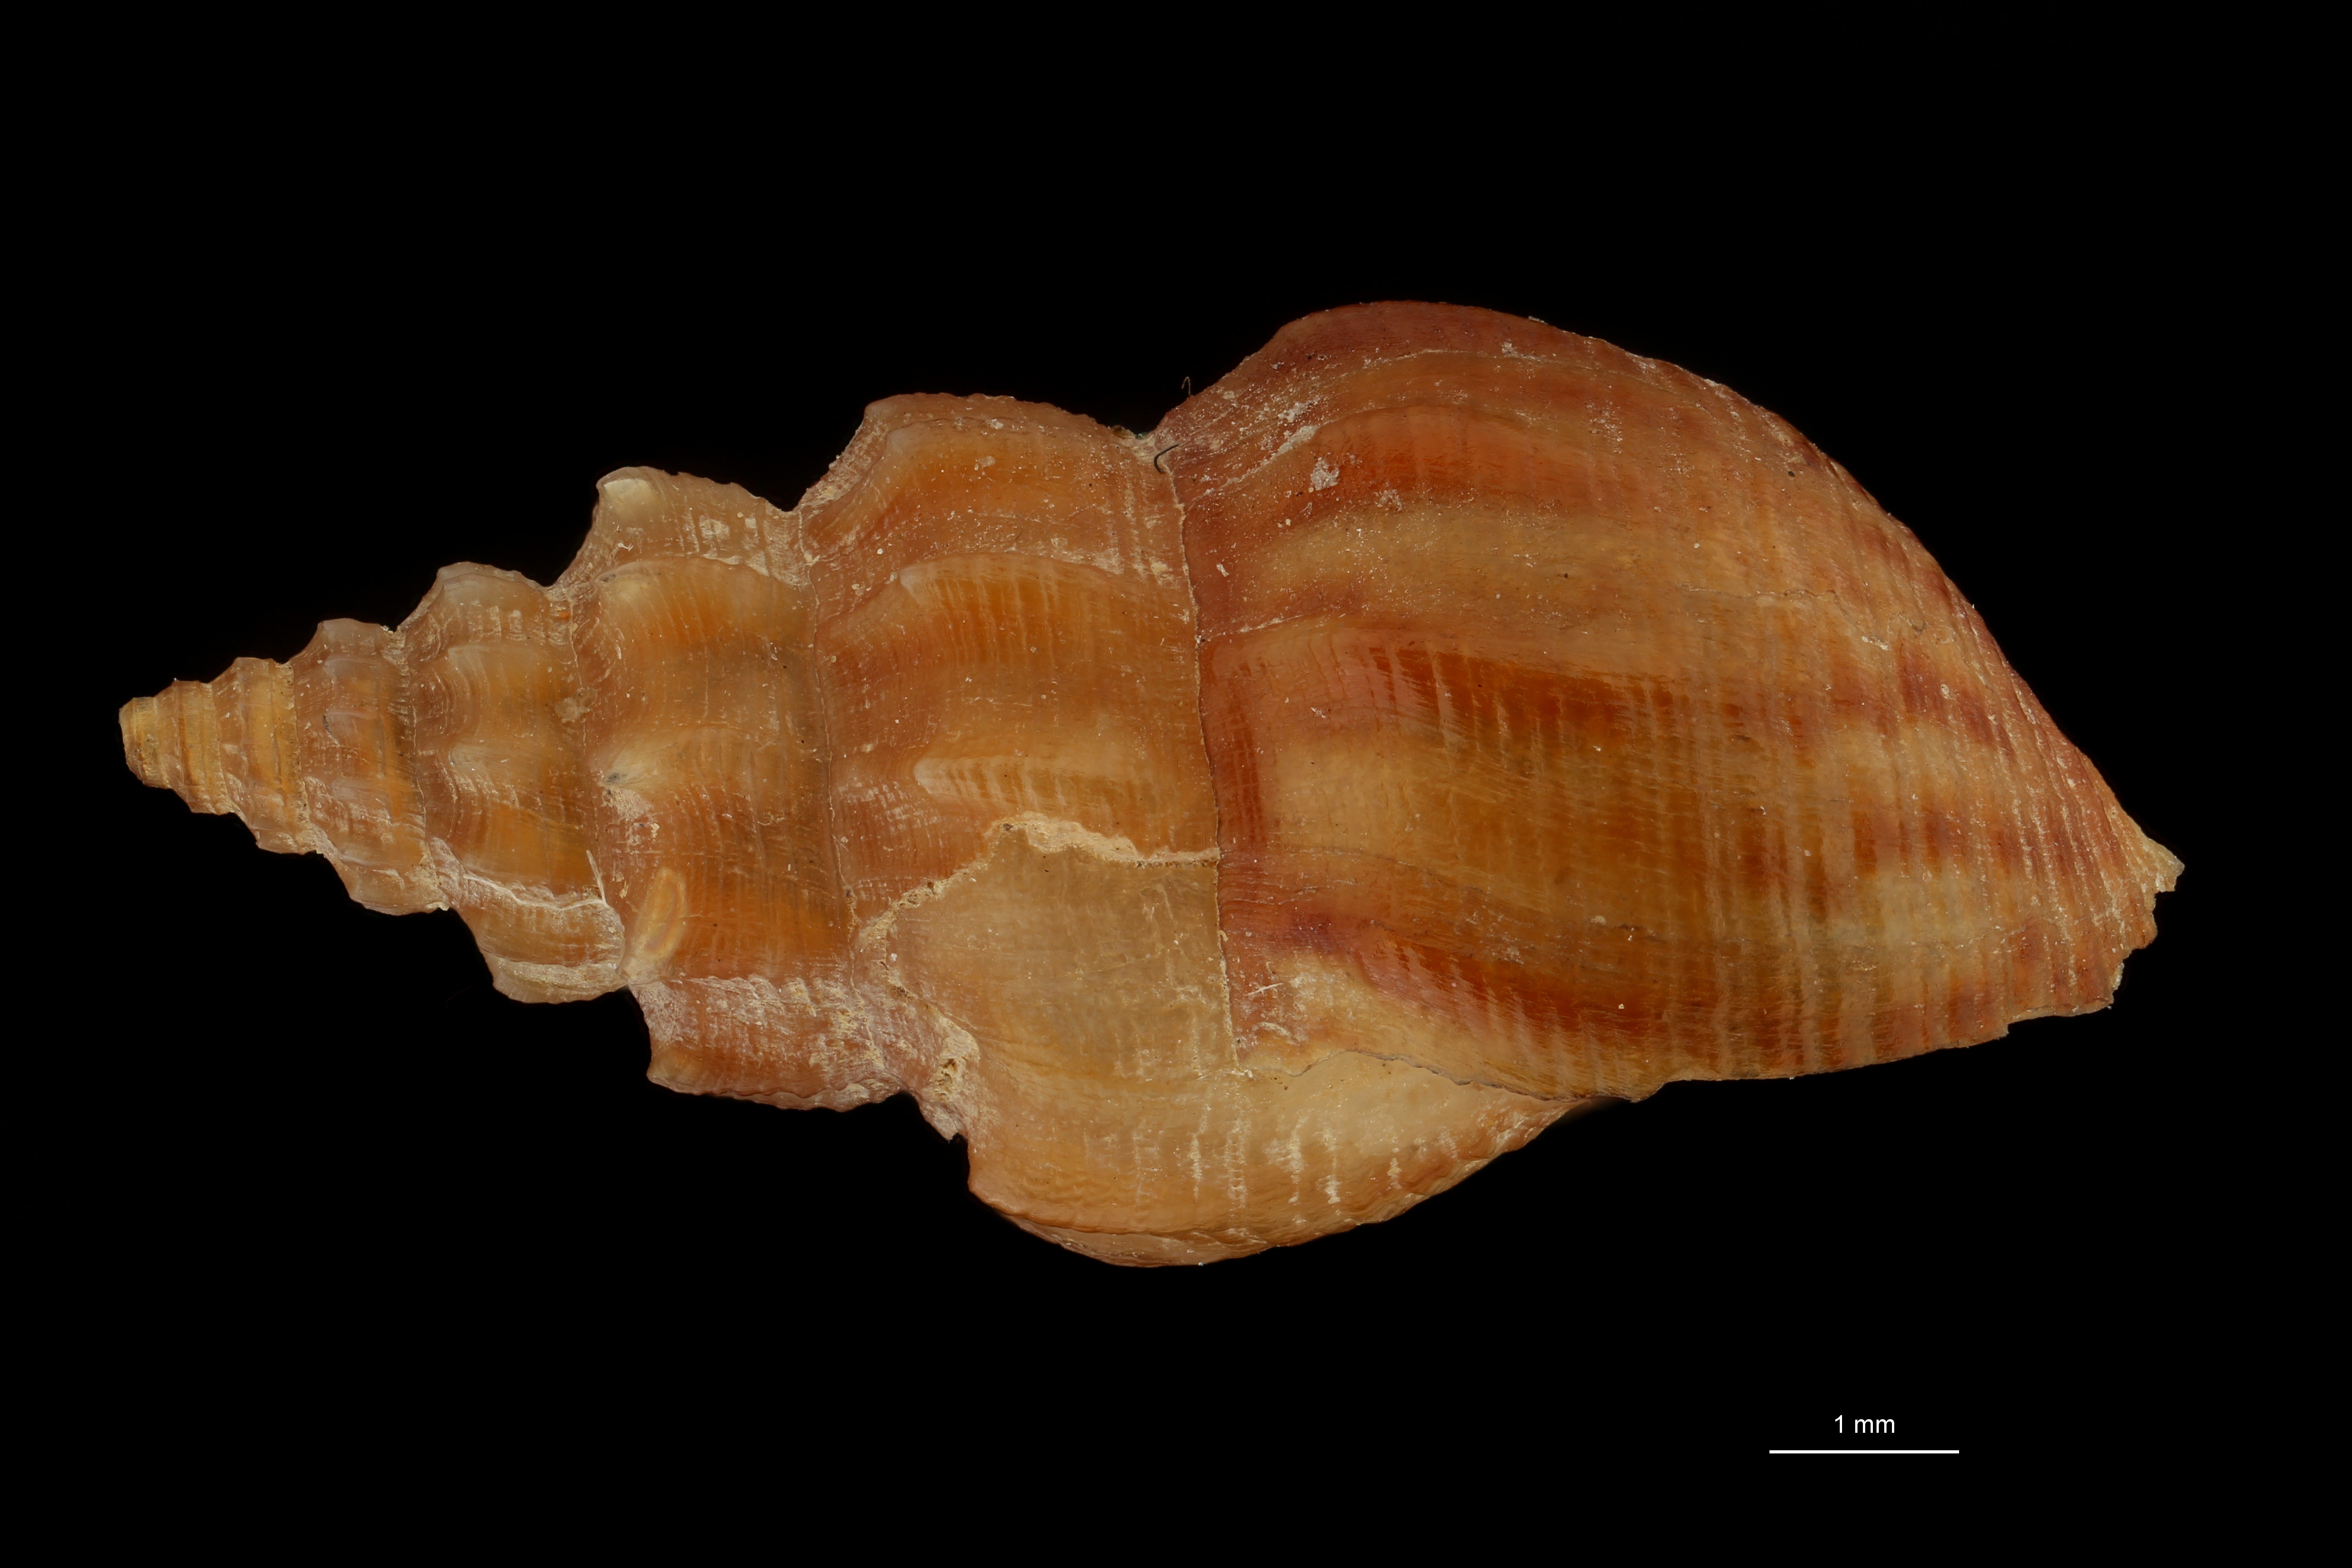 BE-RBINS-INV HOLOTYPE MT 205 Melania keiensis LATERAL ZS DMap Scaled.jpg